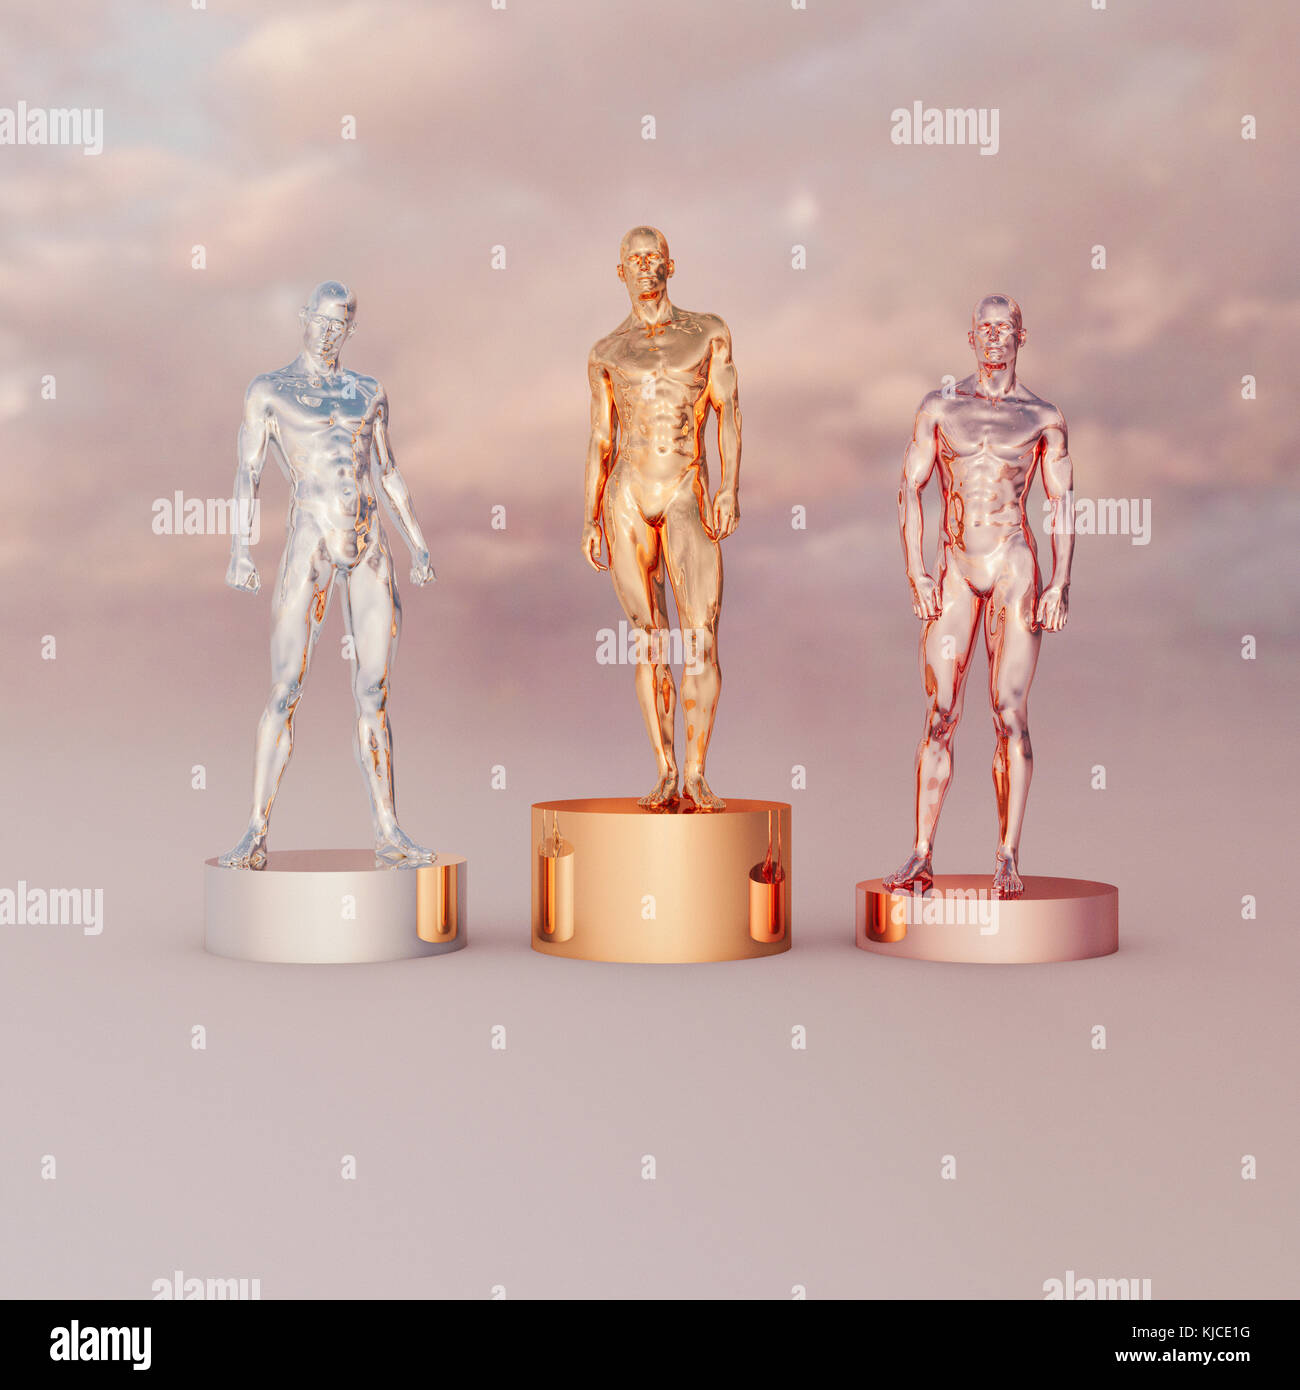 'Gold, silver and bronze men on pedestals' Stock Photo